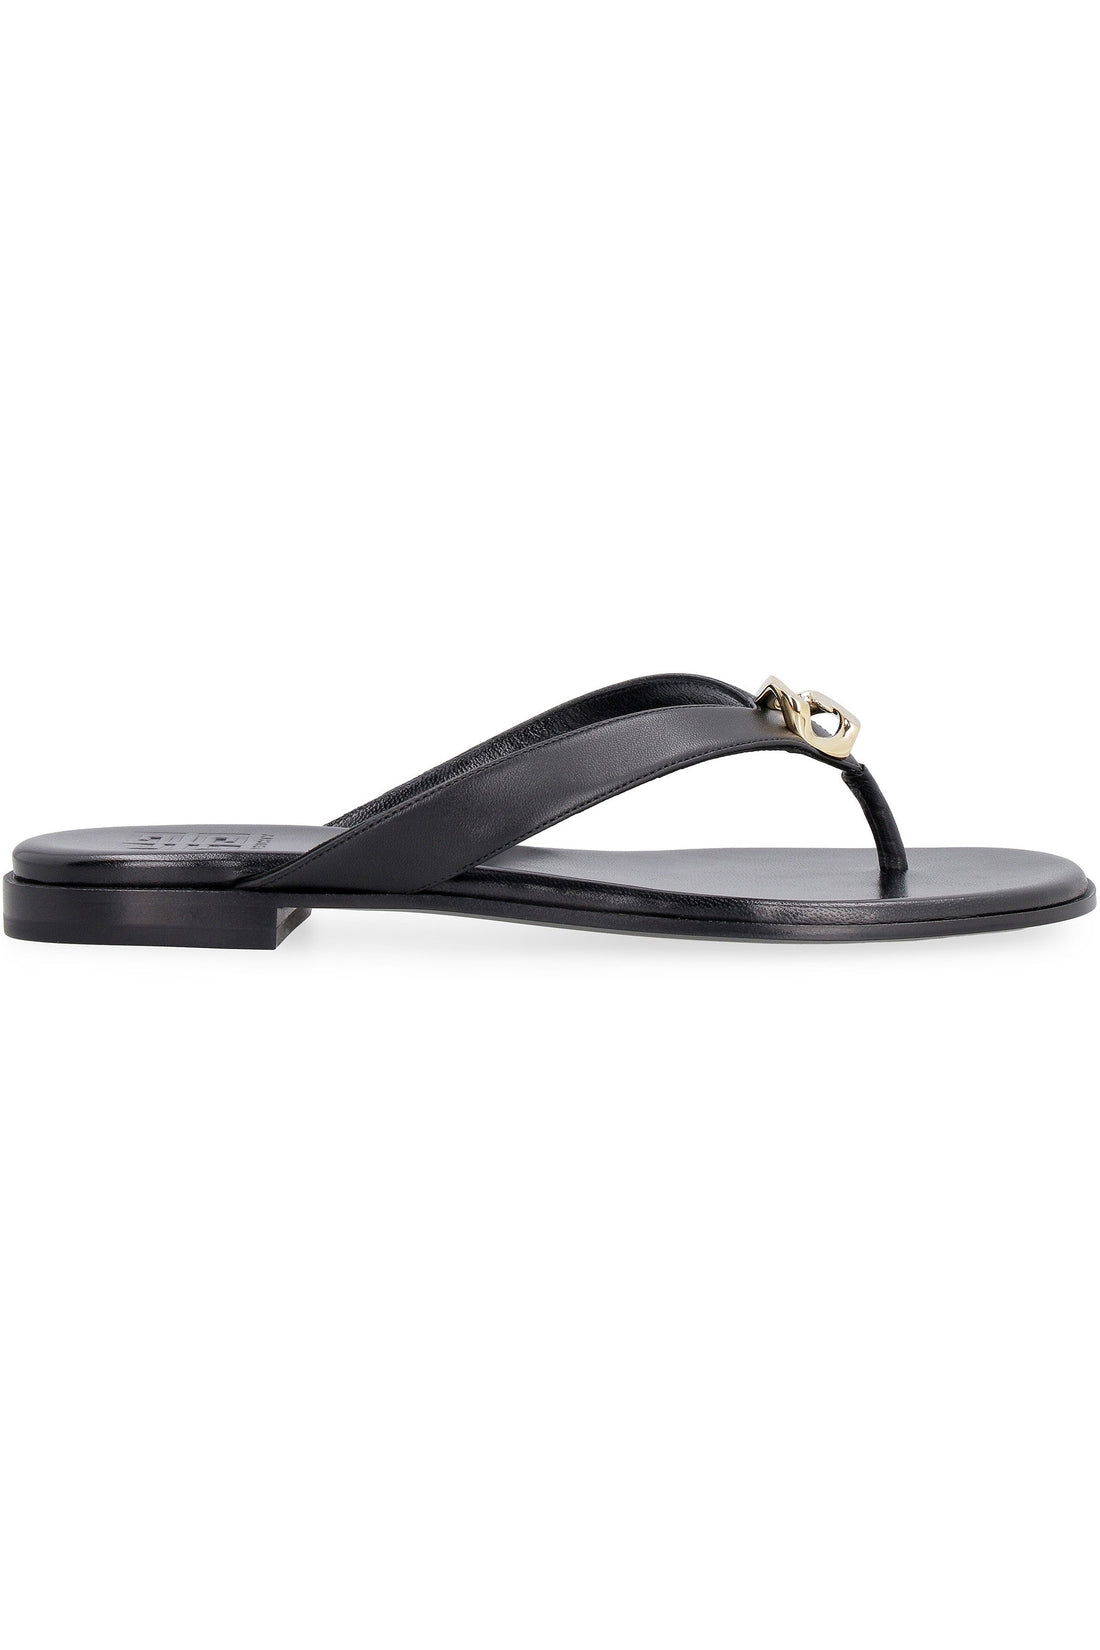 Givenchy-OUTLET-SALE-G Chain leather flat sandals-ARCHIVIST